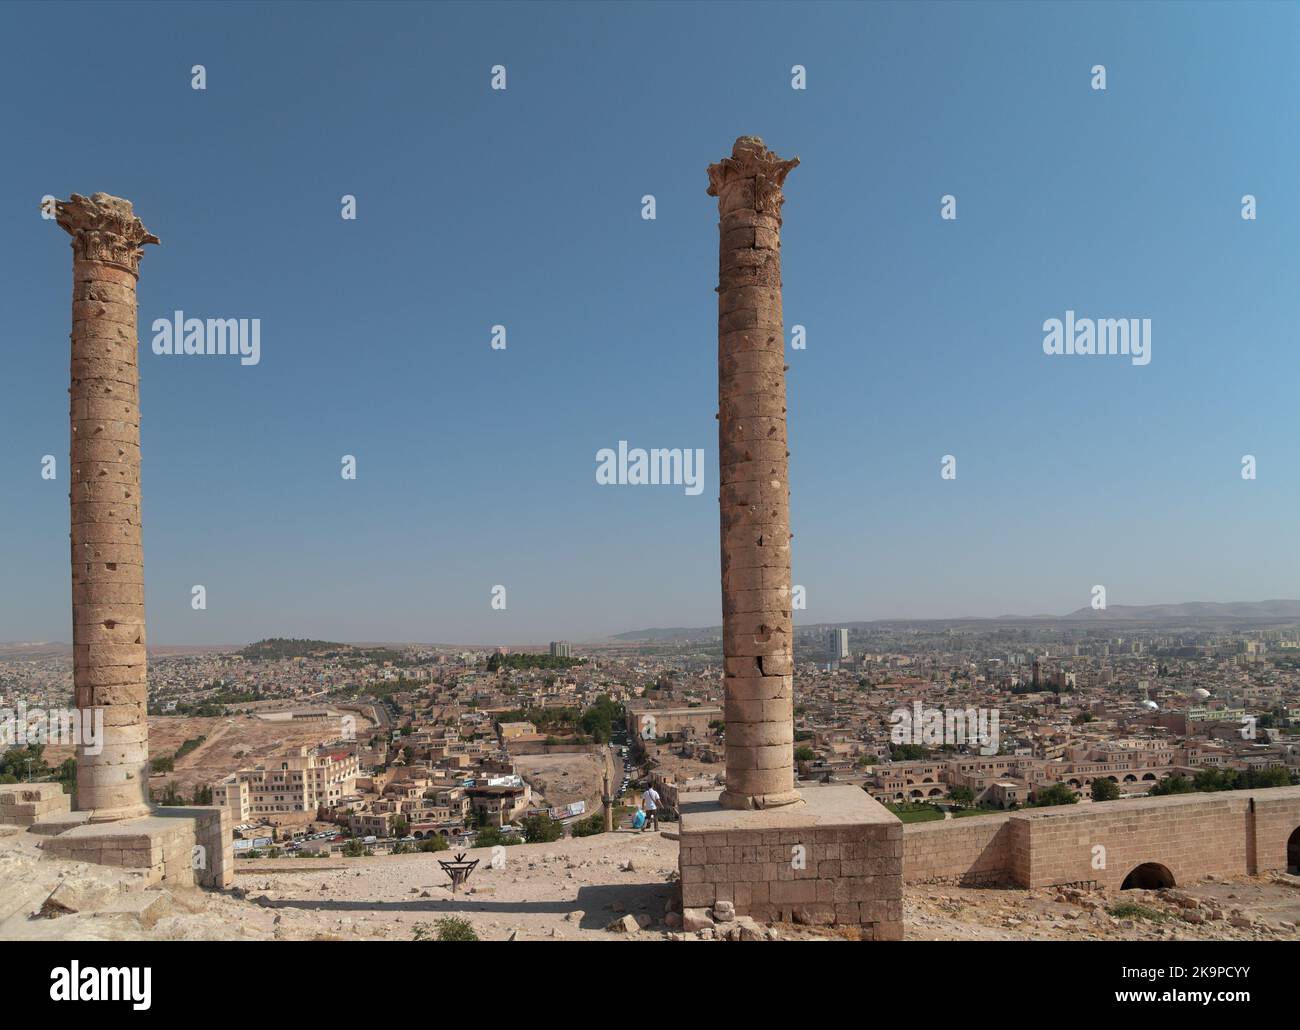 Tourists admire the cityscape under ancient columns in citadel of Urfa, Turkey. The famous dual columns were built by the Abbasids in 814 AD Stock Photo